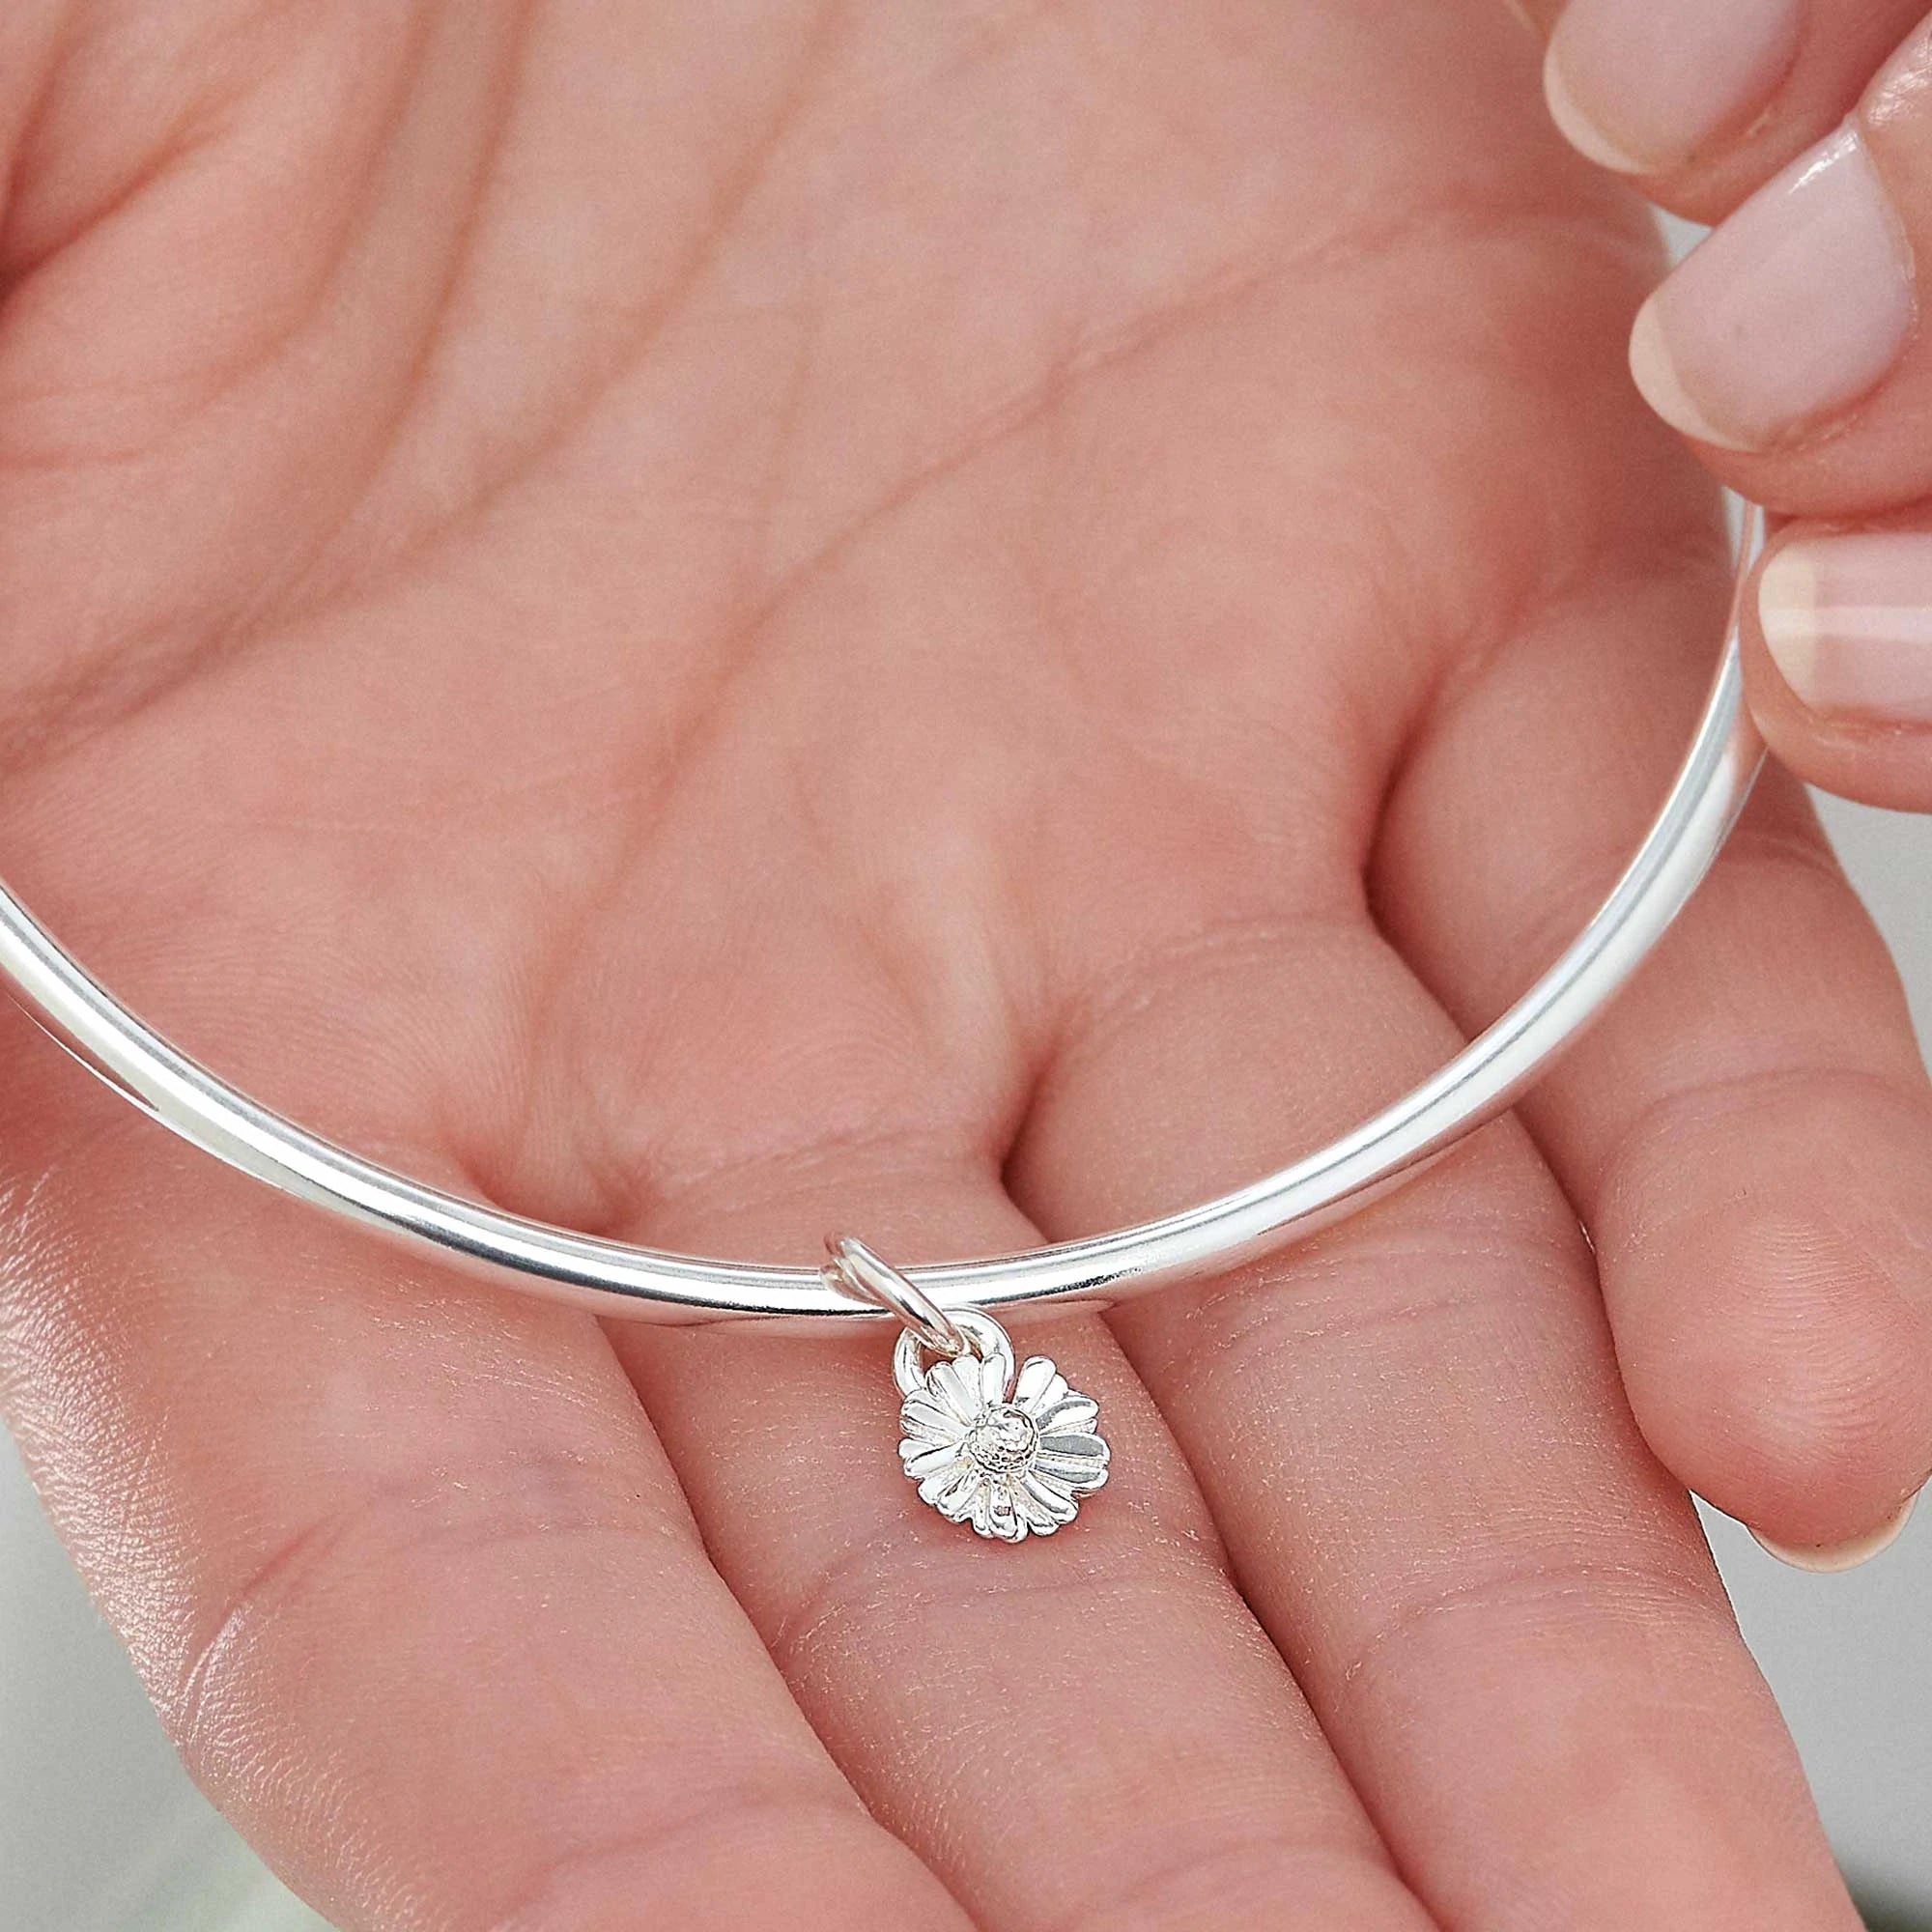 daisy april birth flower silver charm bangle made in the UK recycled silver Scarlett Jewellery